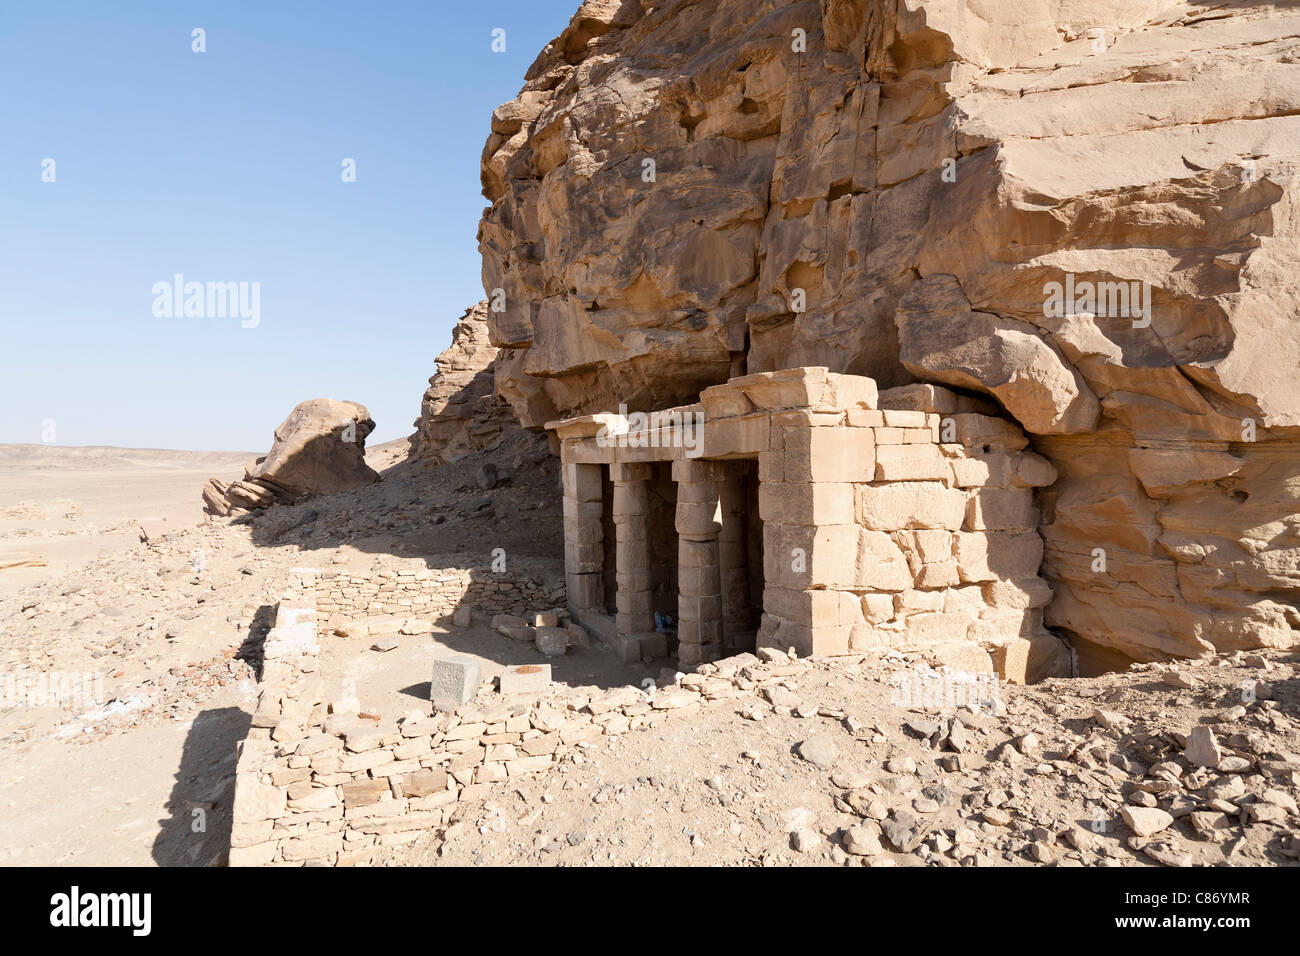 Kanais, Temple of King Seti 1 in the Wadi Abad in the Eastern Desert of Egypt Stock Photo